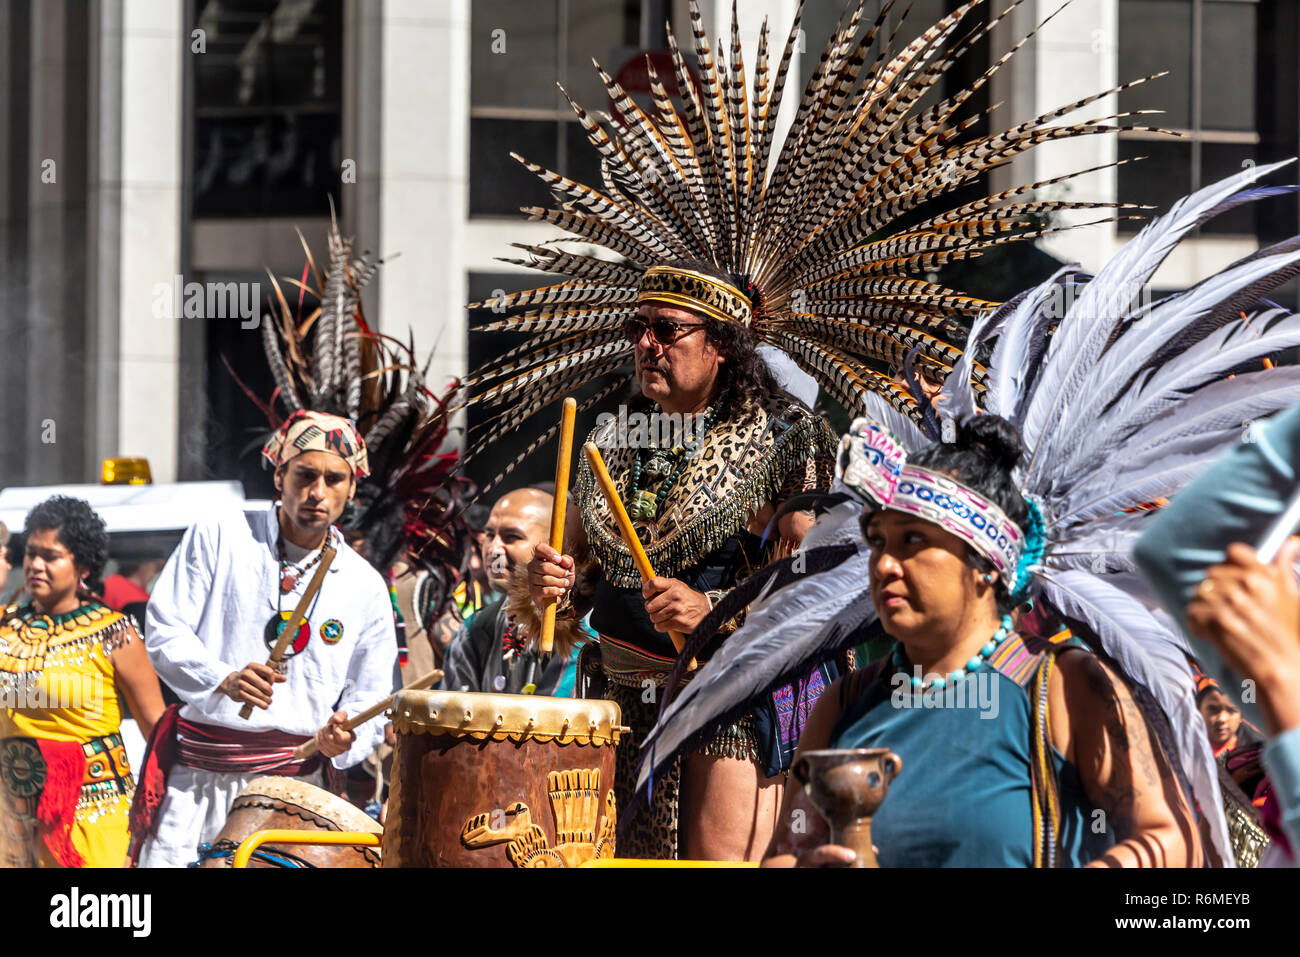 San Francisco, California, USA. 8th September, 2018. Thousands gather in San Francisco in Rise for Climate rally and march in advance of the Global Climate Action Summit to be held there September 12 to 14. A group of Native American people in traiditional regalia play drums during the march down Market Street. Stock Photo